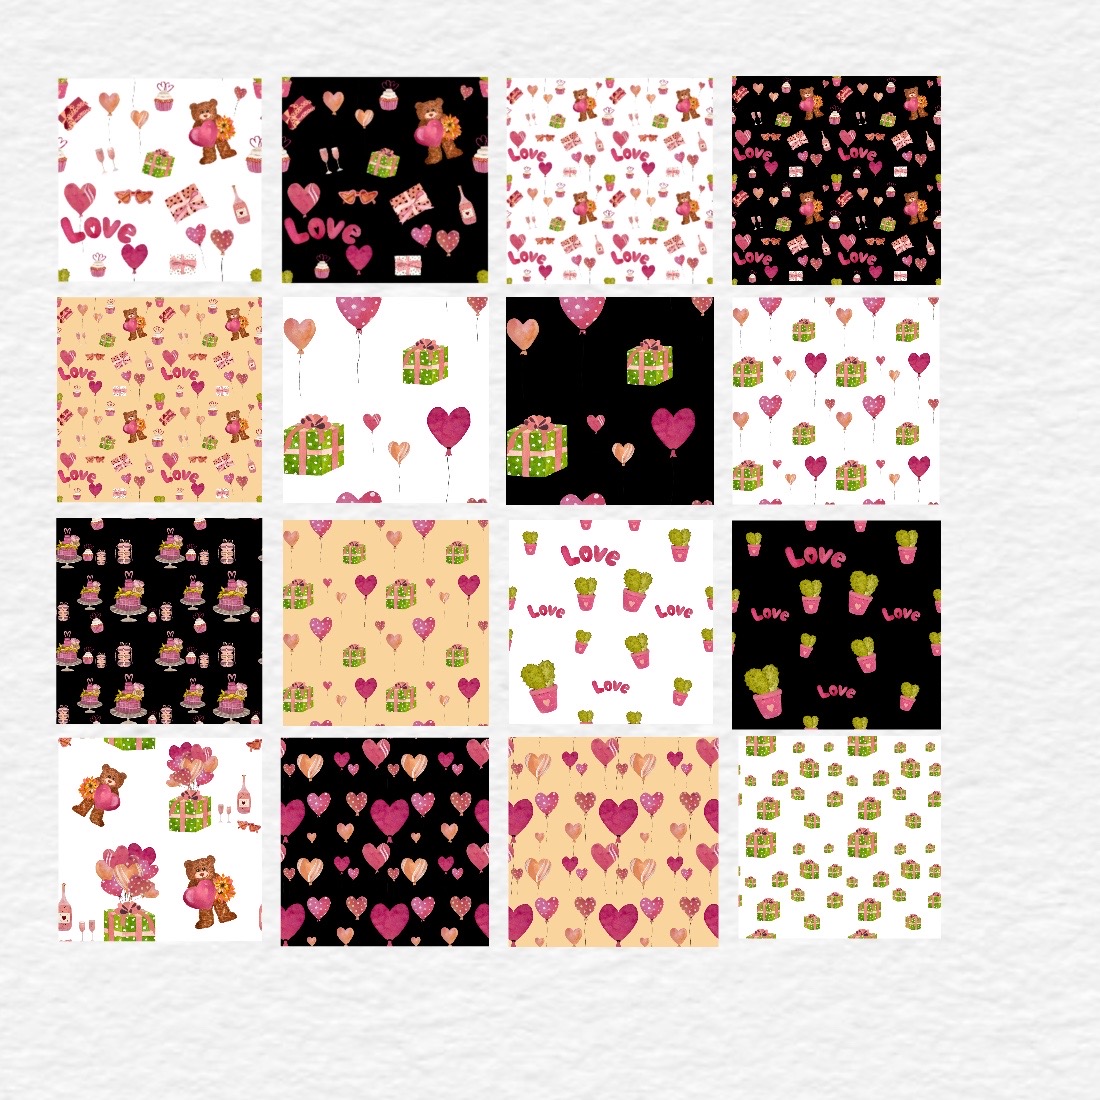 Heart Seamless Patterns Design cover image.